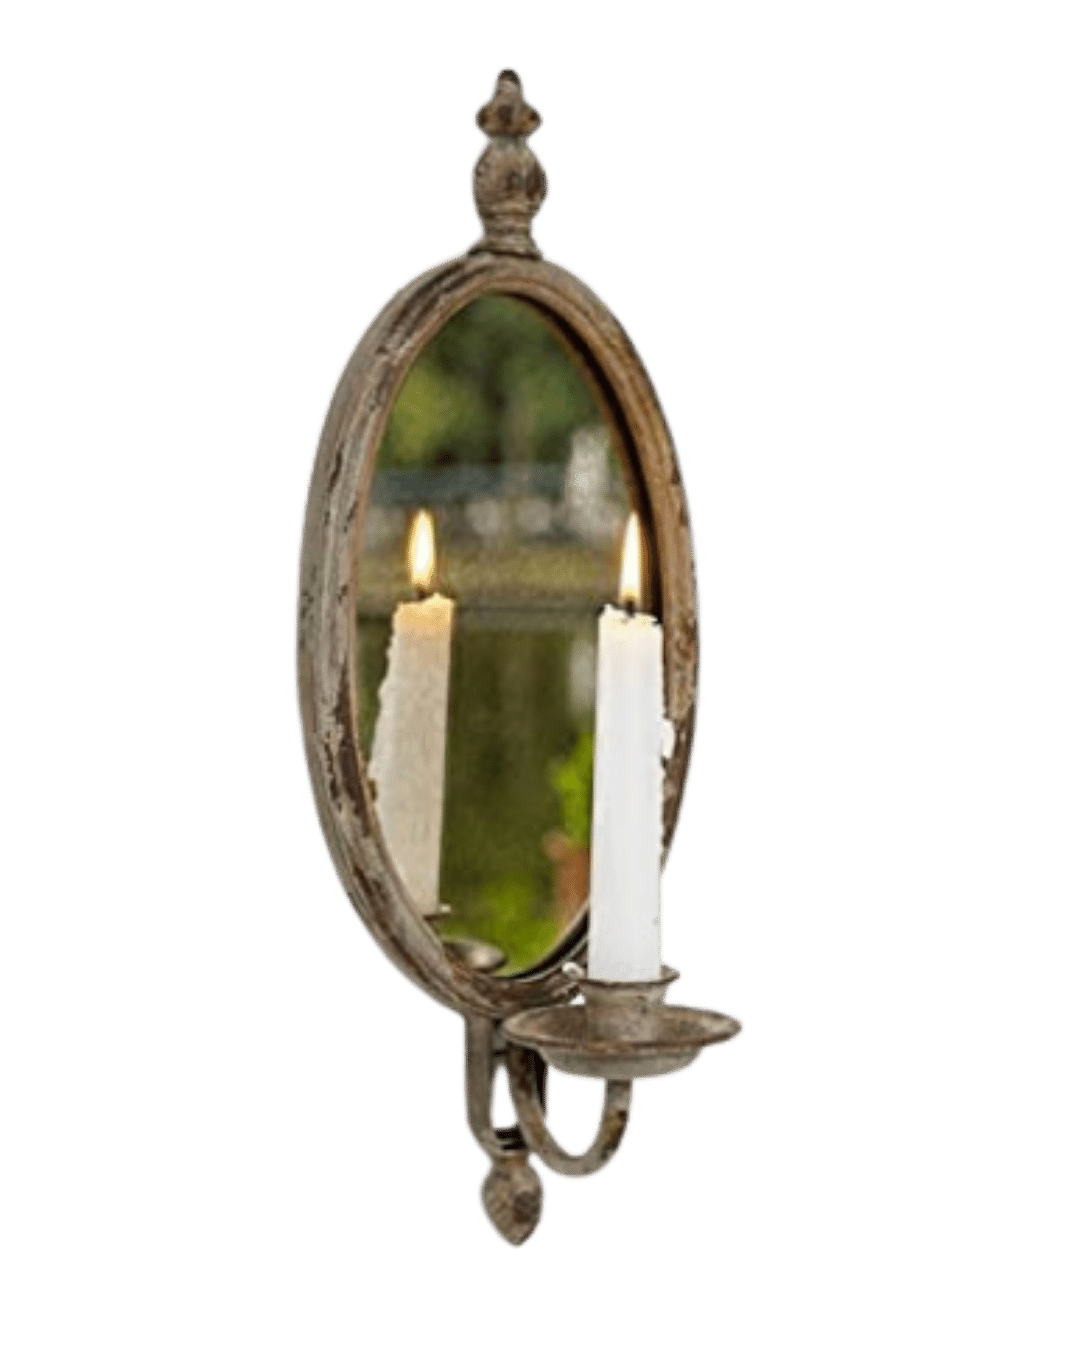  Antique Metal Candle Holder Wall Mounted with Oval Faded-Looking Mirror